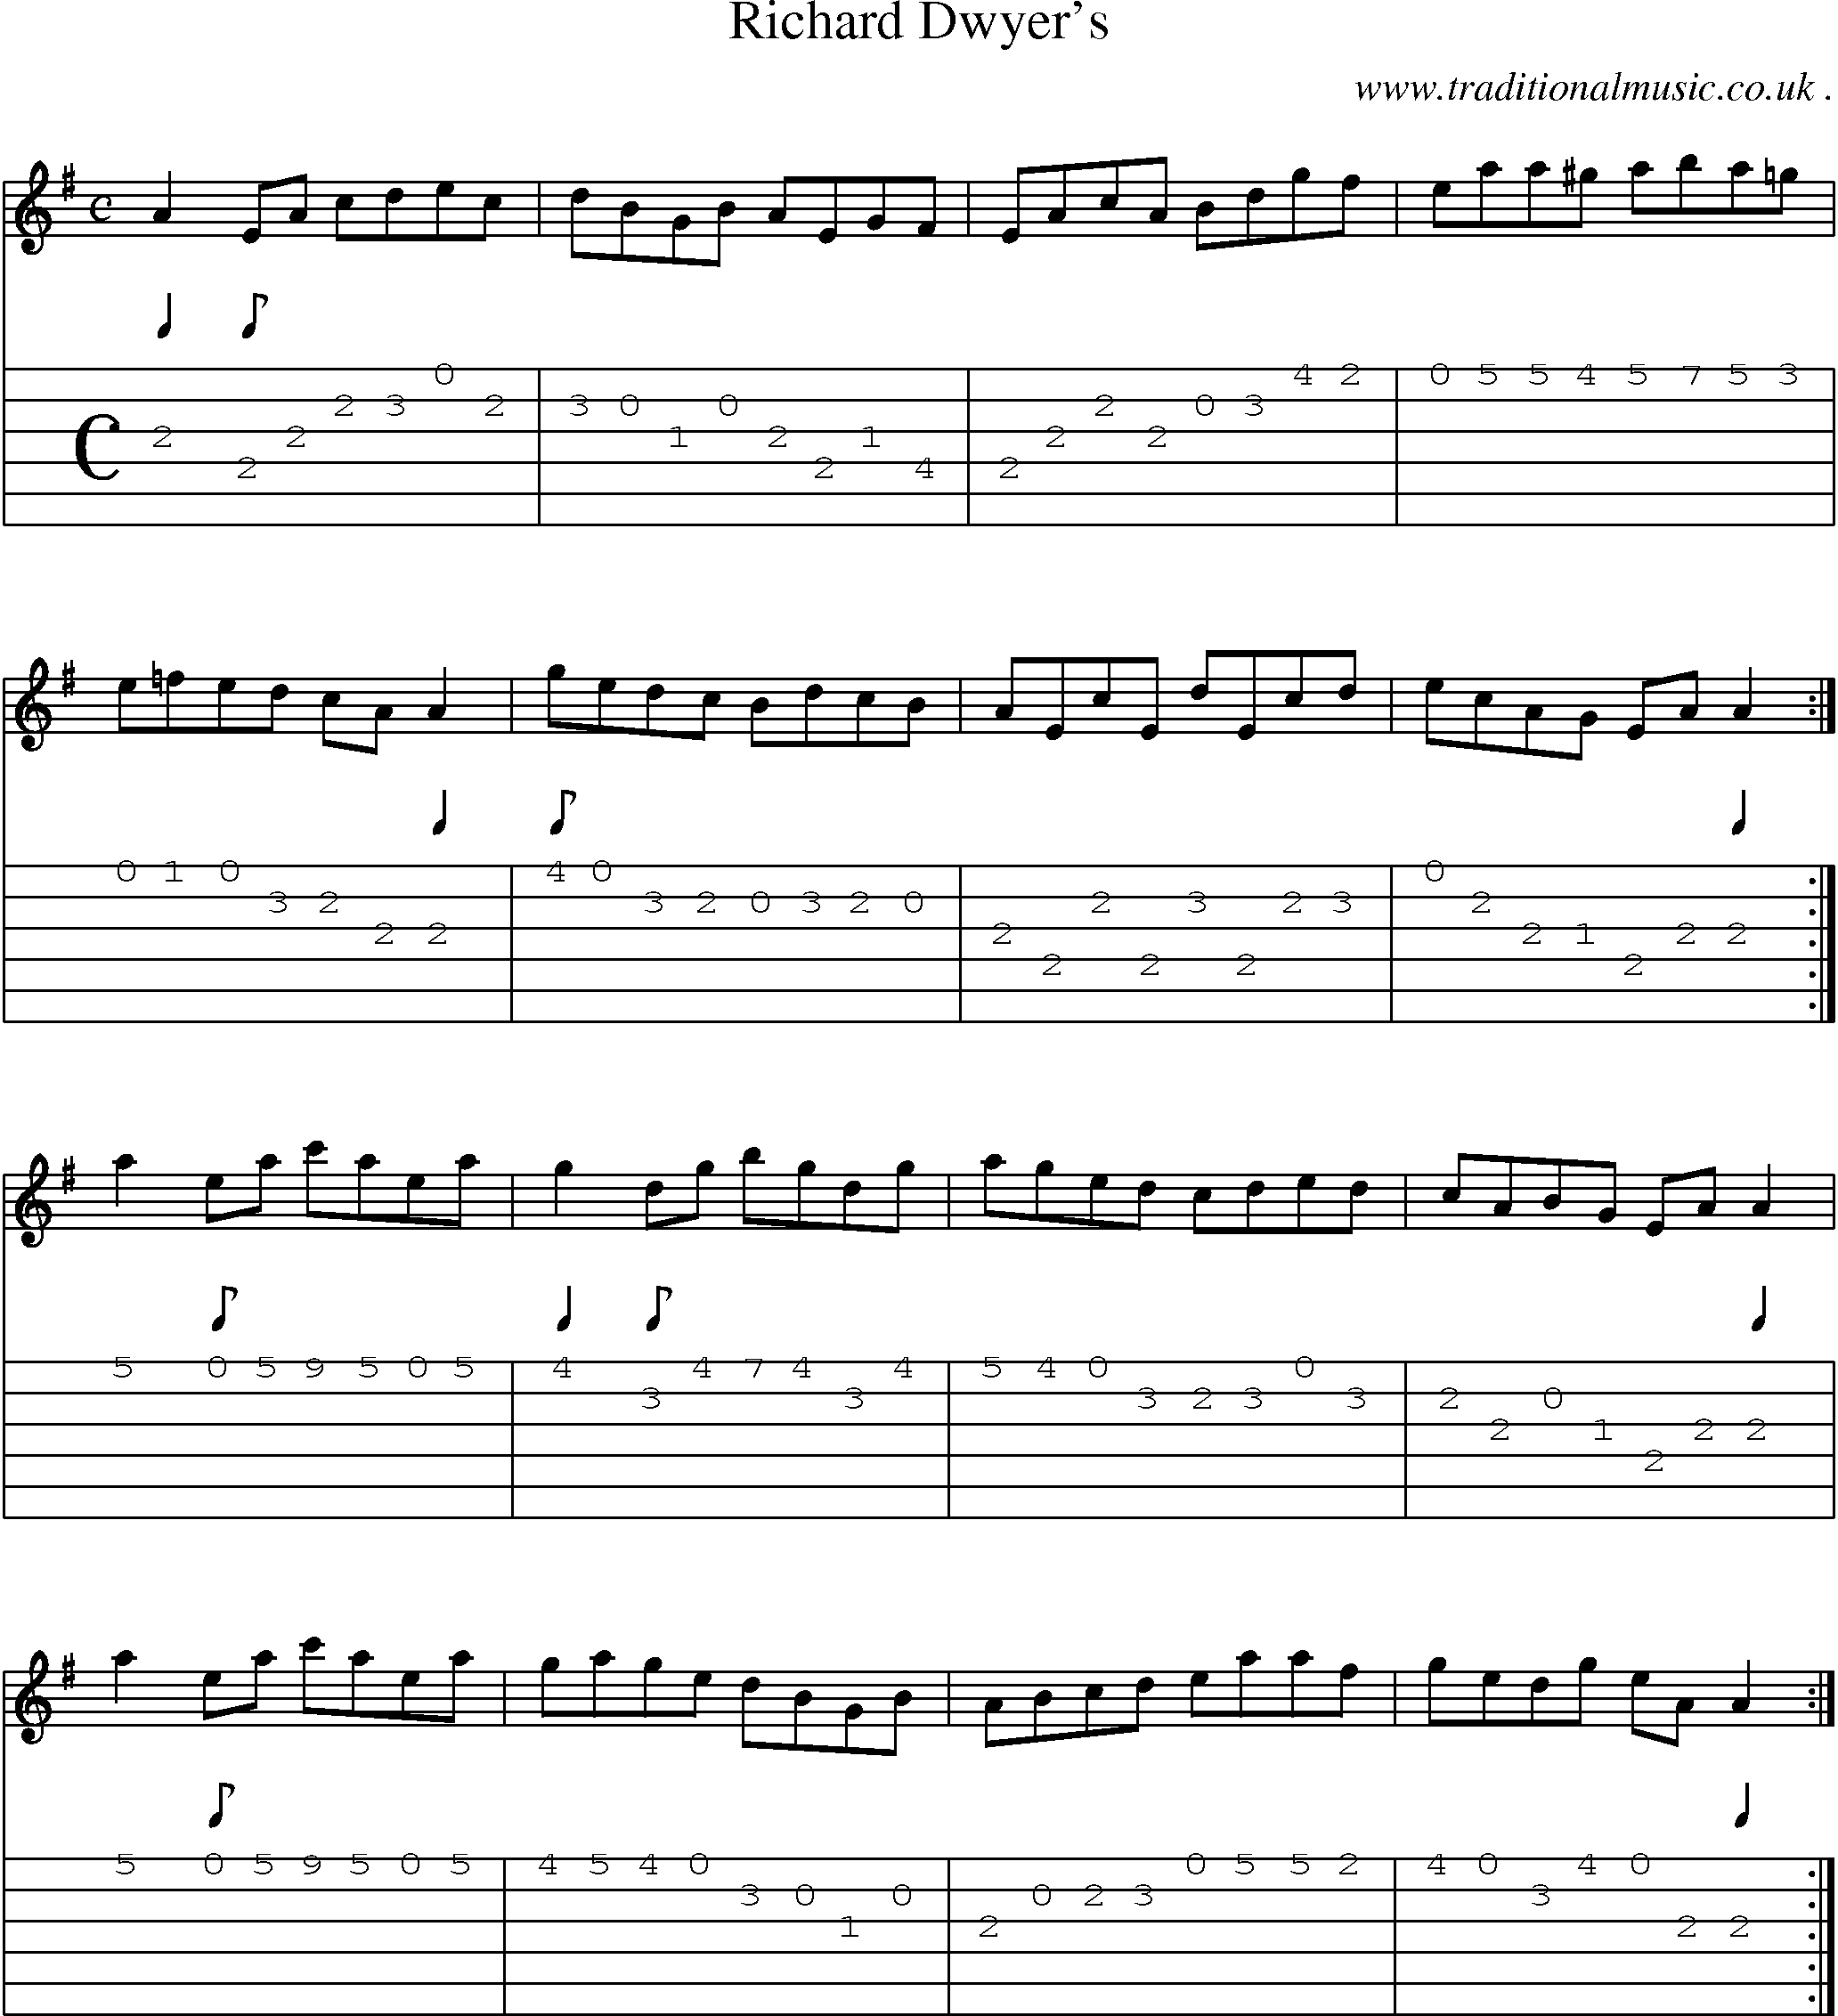 Sheet-Music and Guitar Tabs for Richard Dwyers